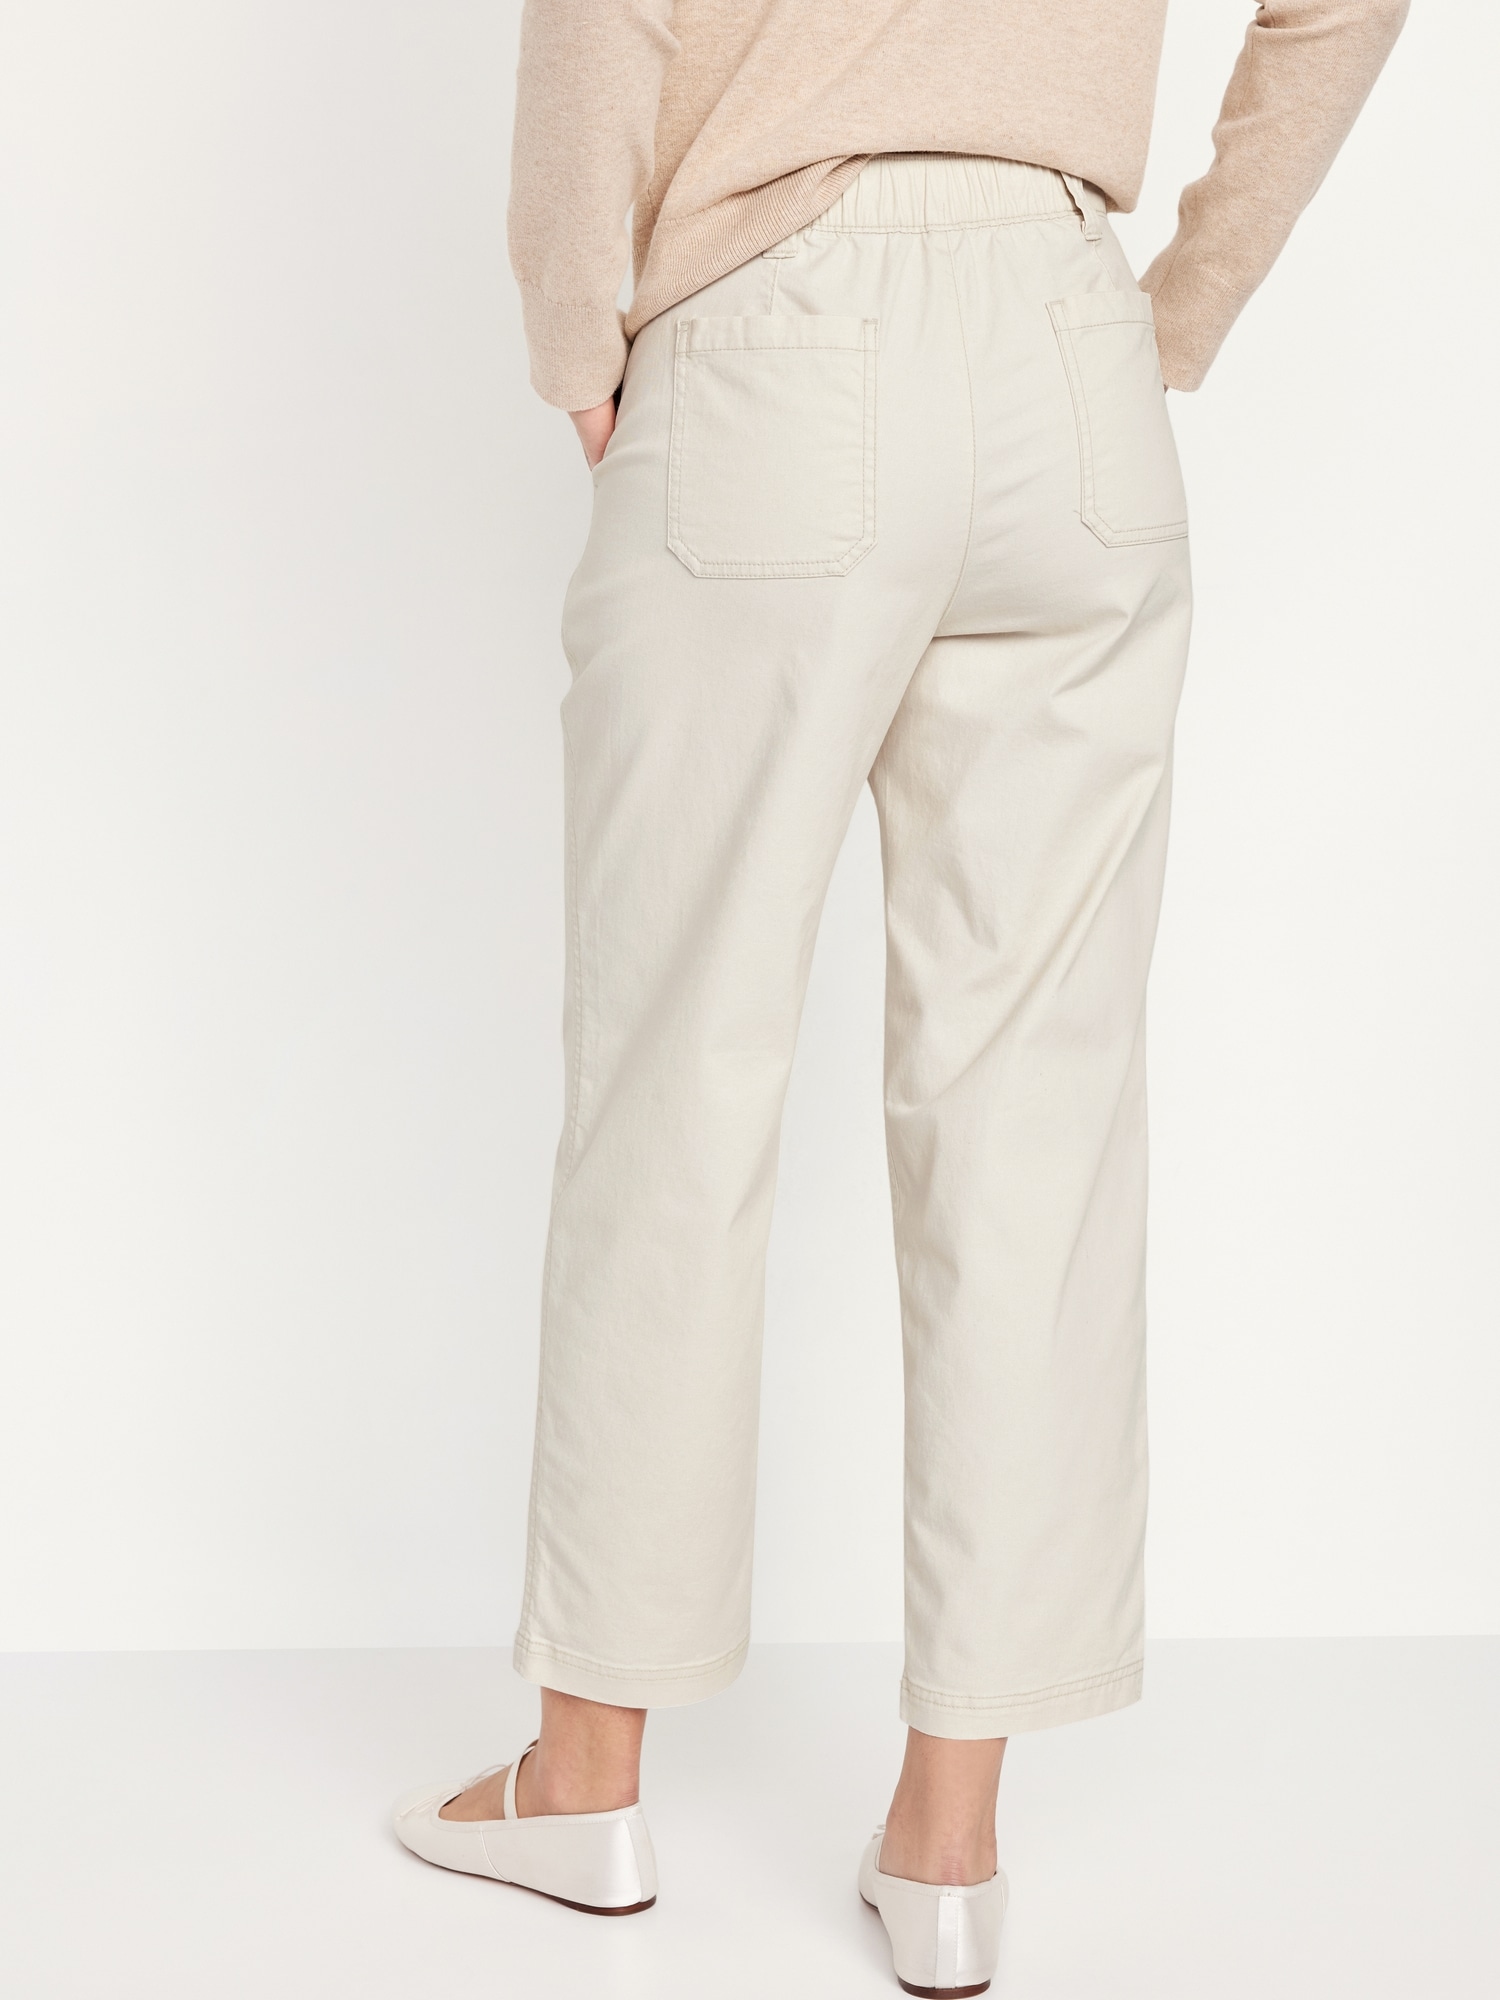 Old Navy, Pants & Jumpsuits, Highwaisted Ogc Chino Pants For Women Khaki